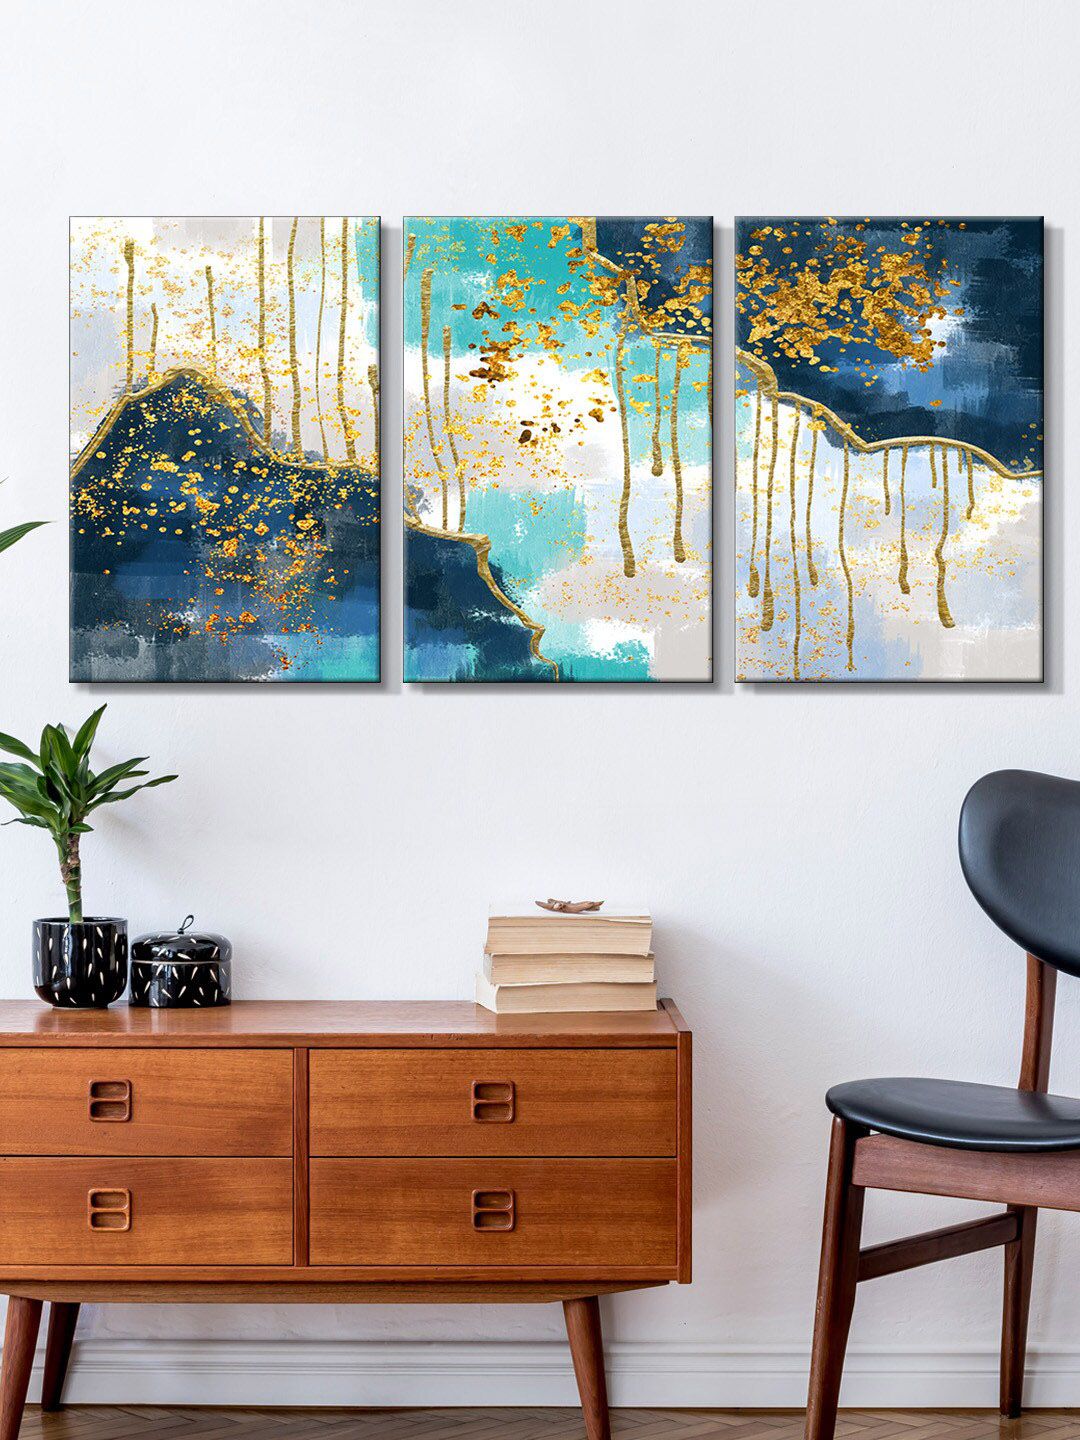 999Store Set Of 3 Blue & Gold-Toned Canvas Painting Wall Art Price in India